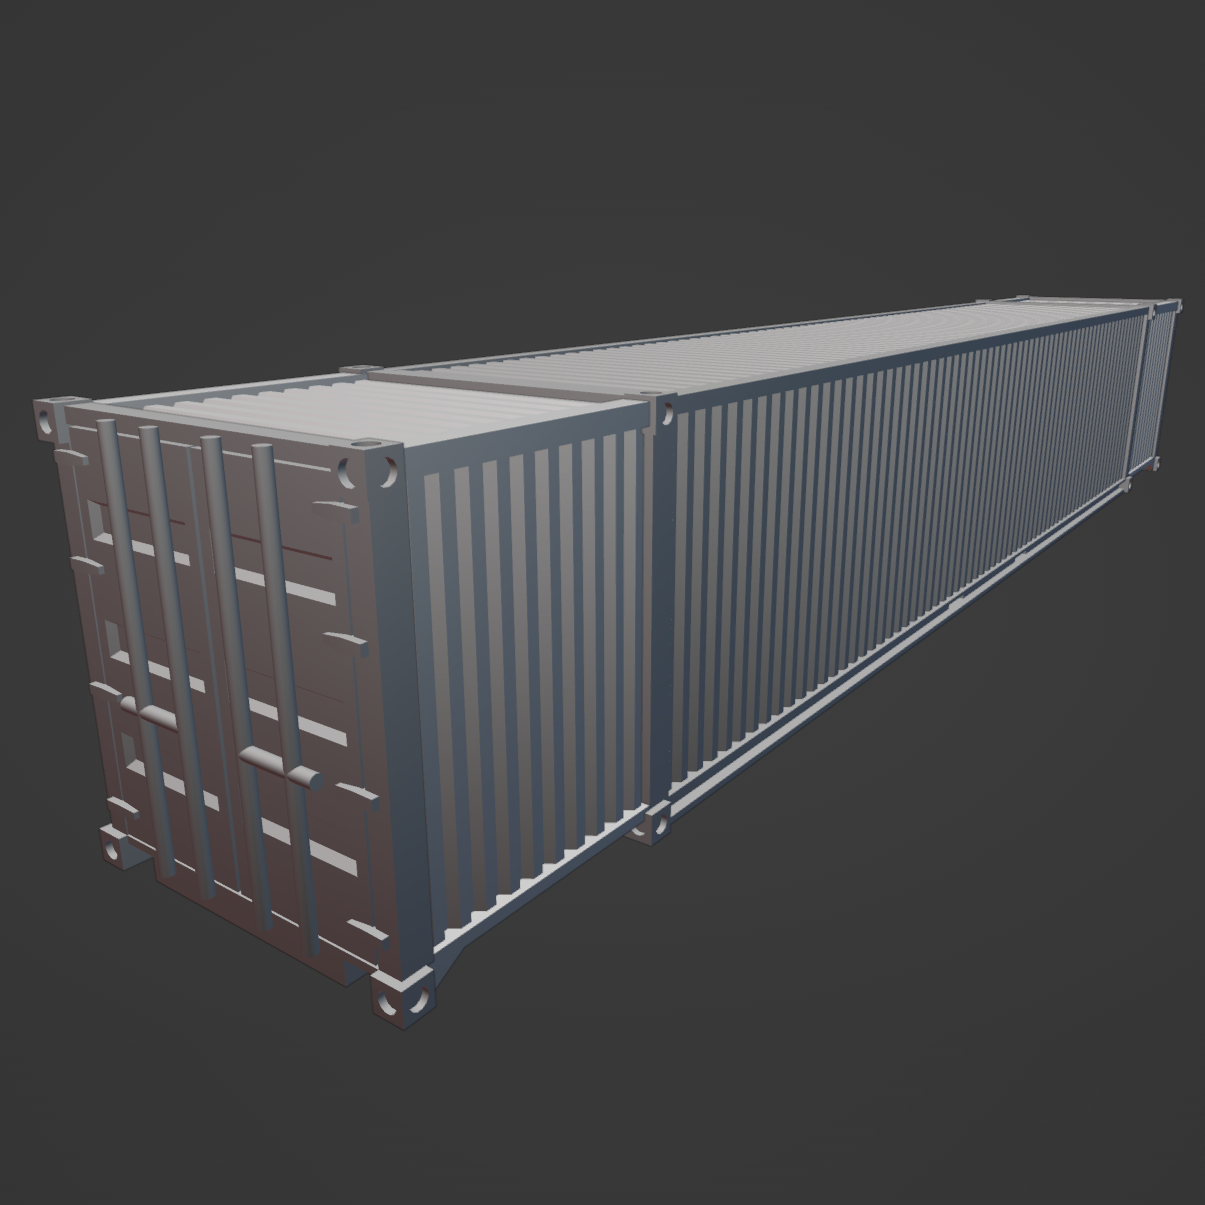 N scale cargo container 3D printed 10 ft